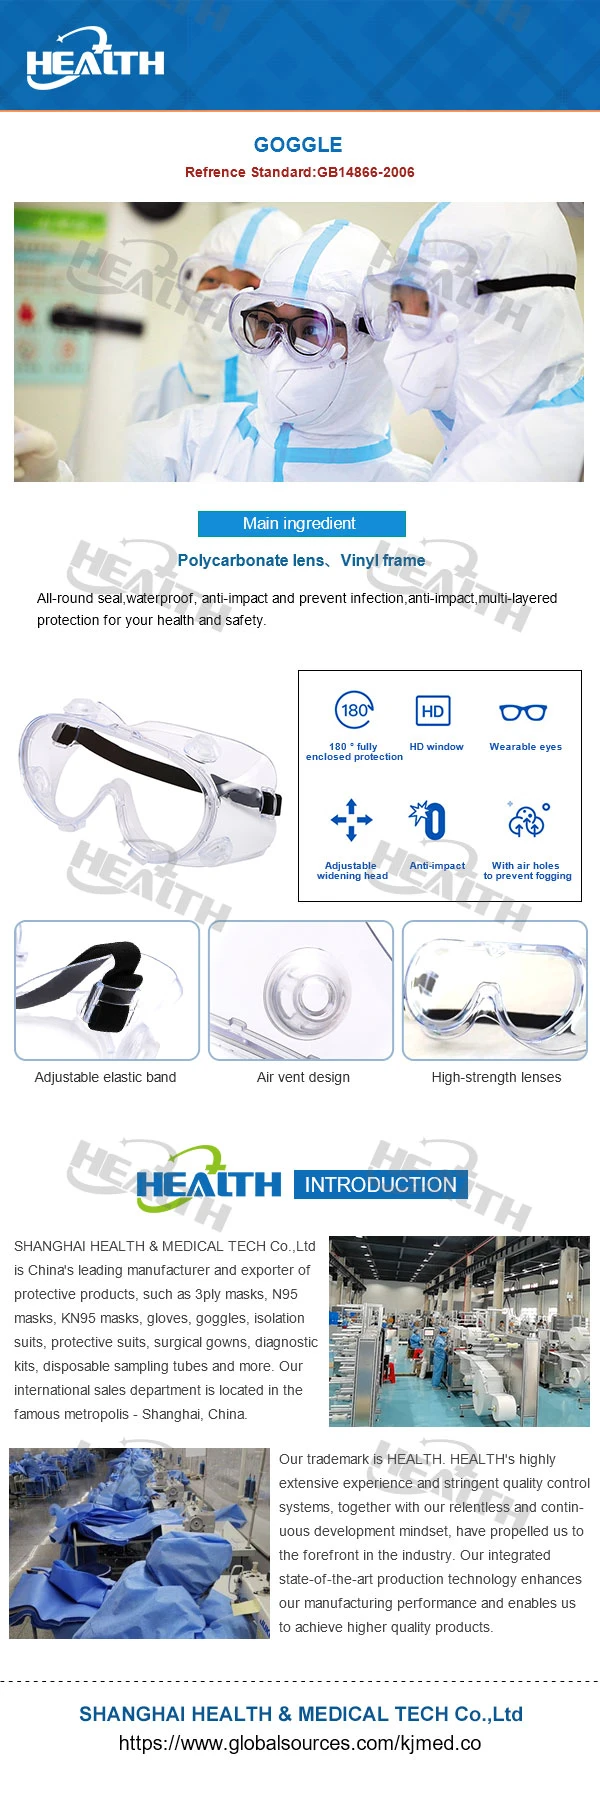 Fog Safety Protective Glasses Goggles PPE Gzsk